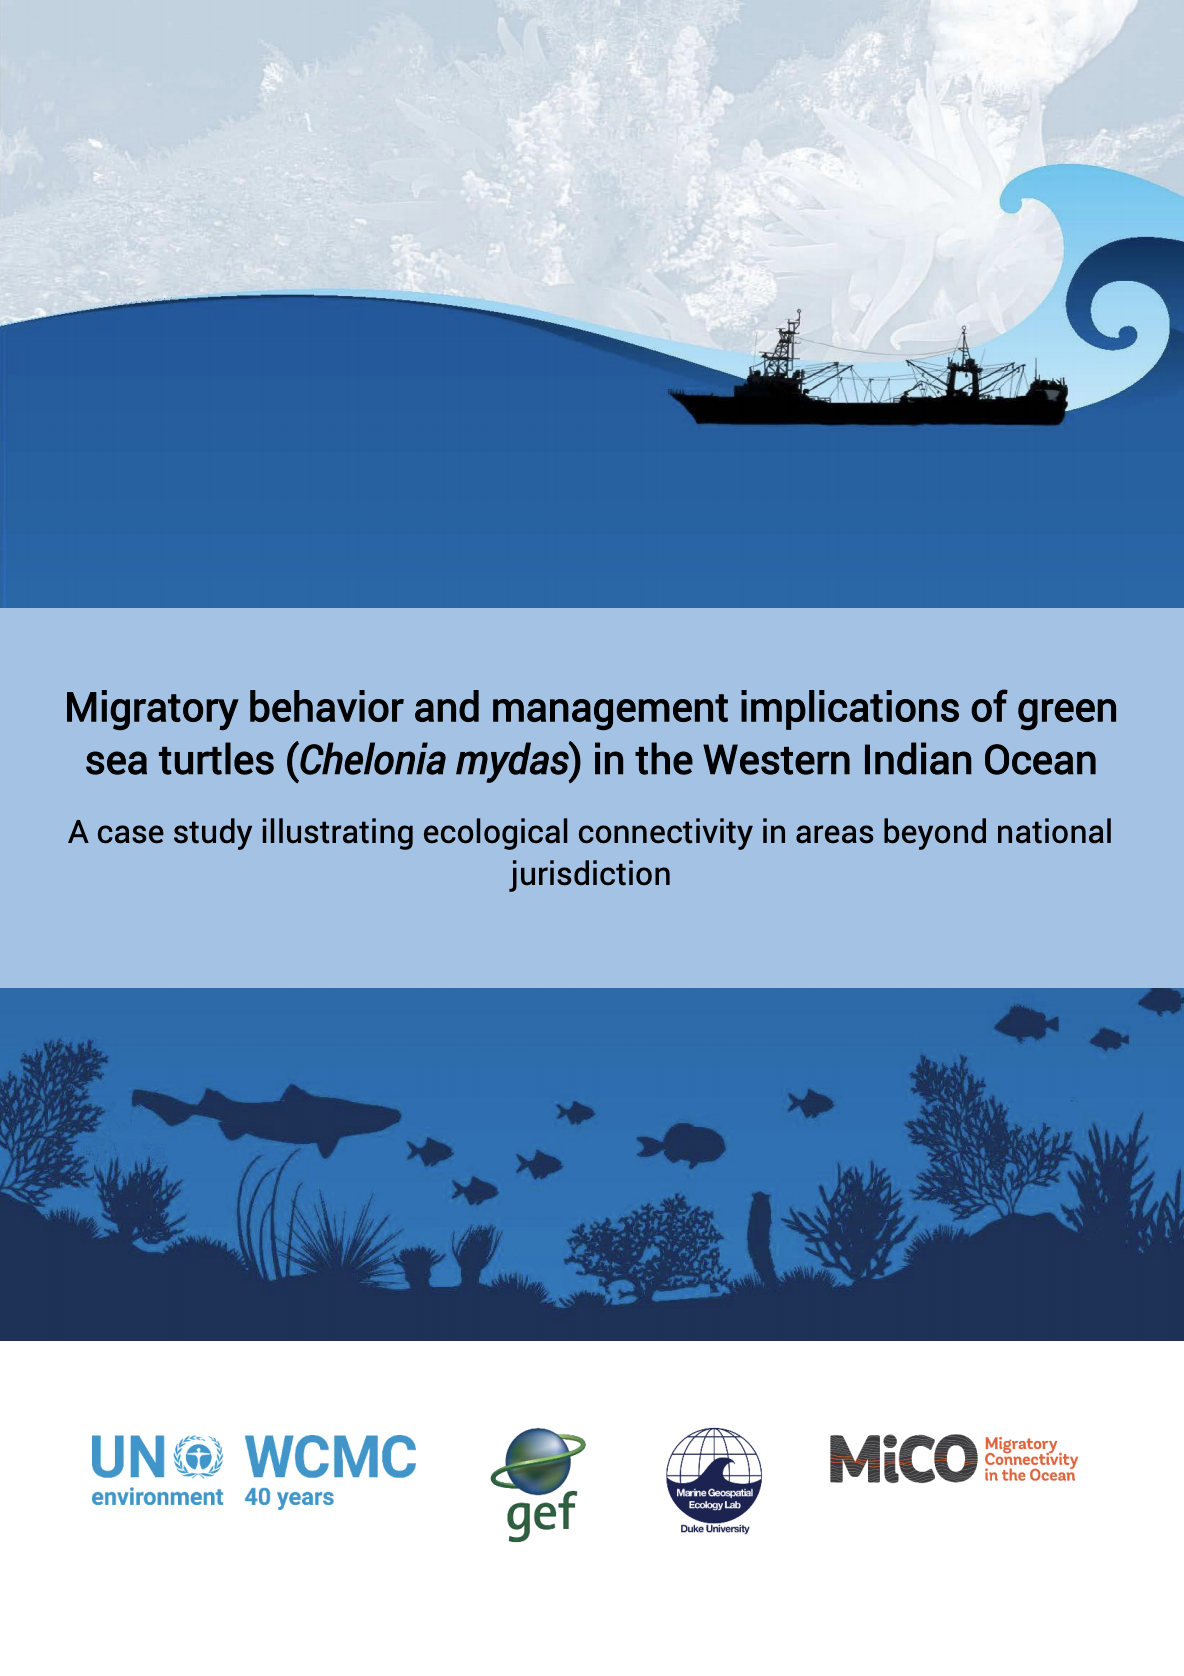 Migratory behavior and management implications of green sea turtles (Chelonia mydas) in the Western Indian Ocean